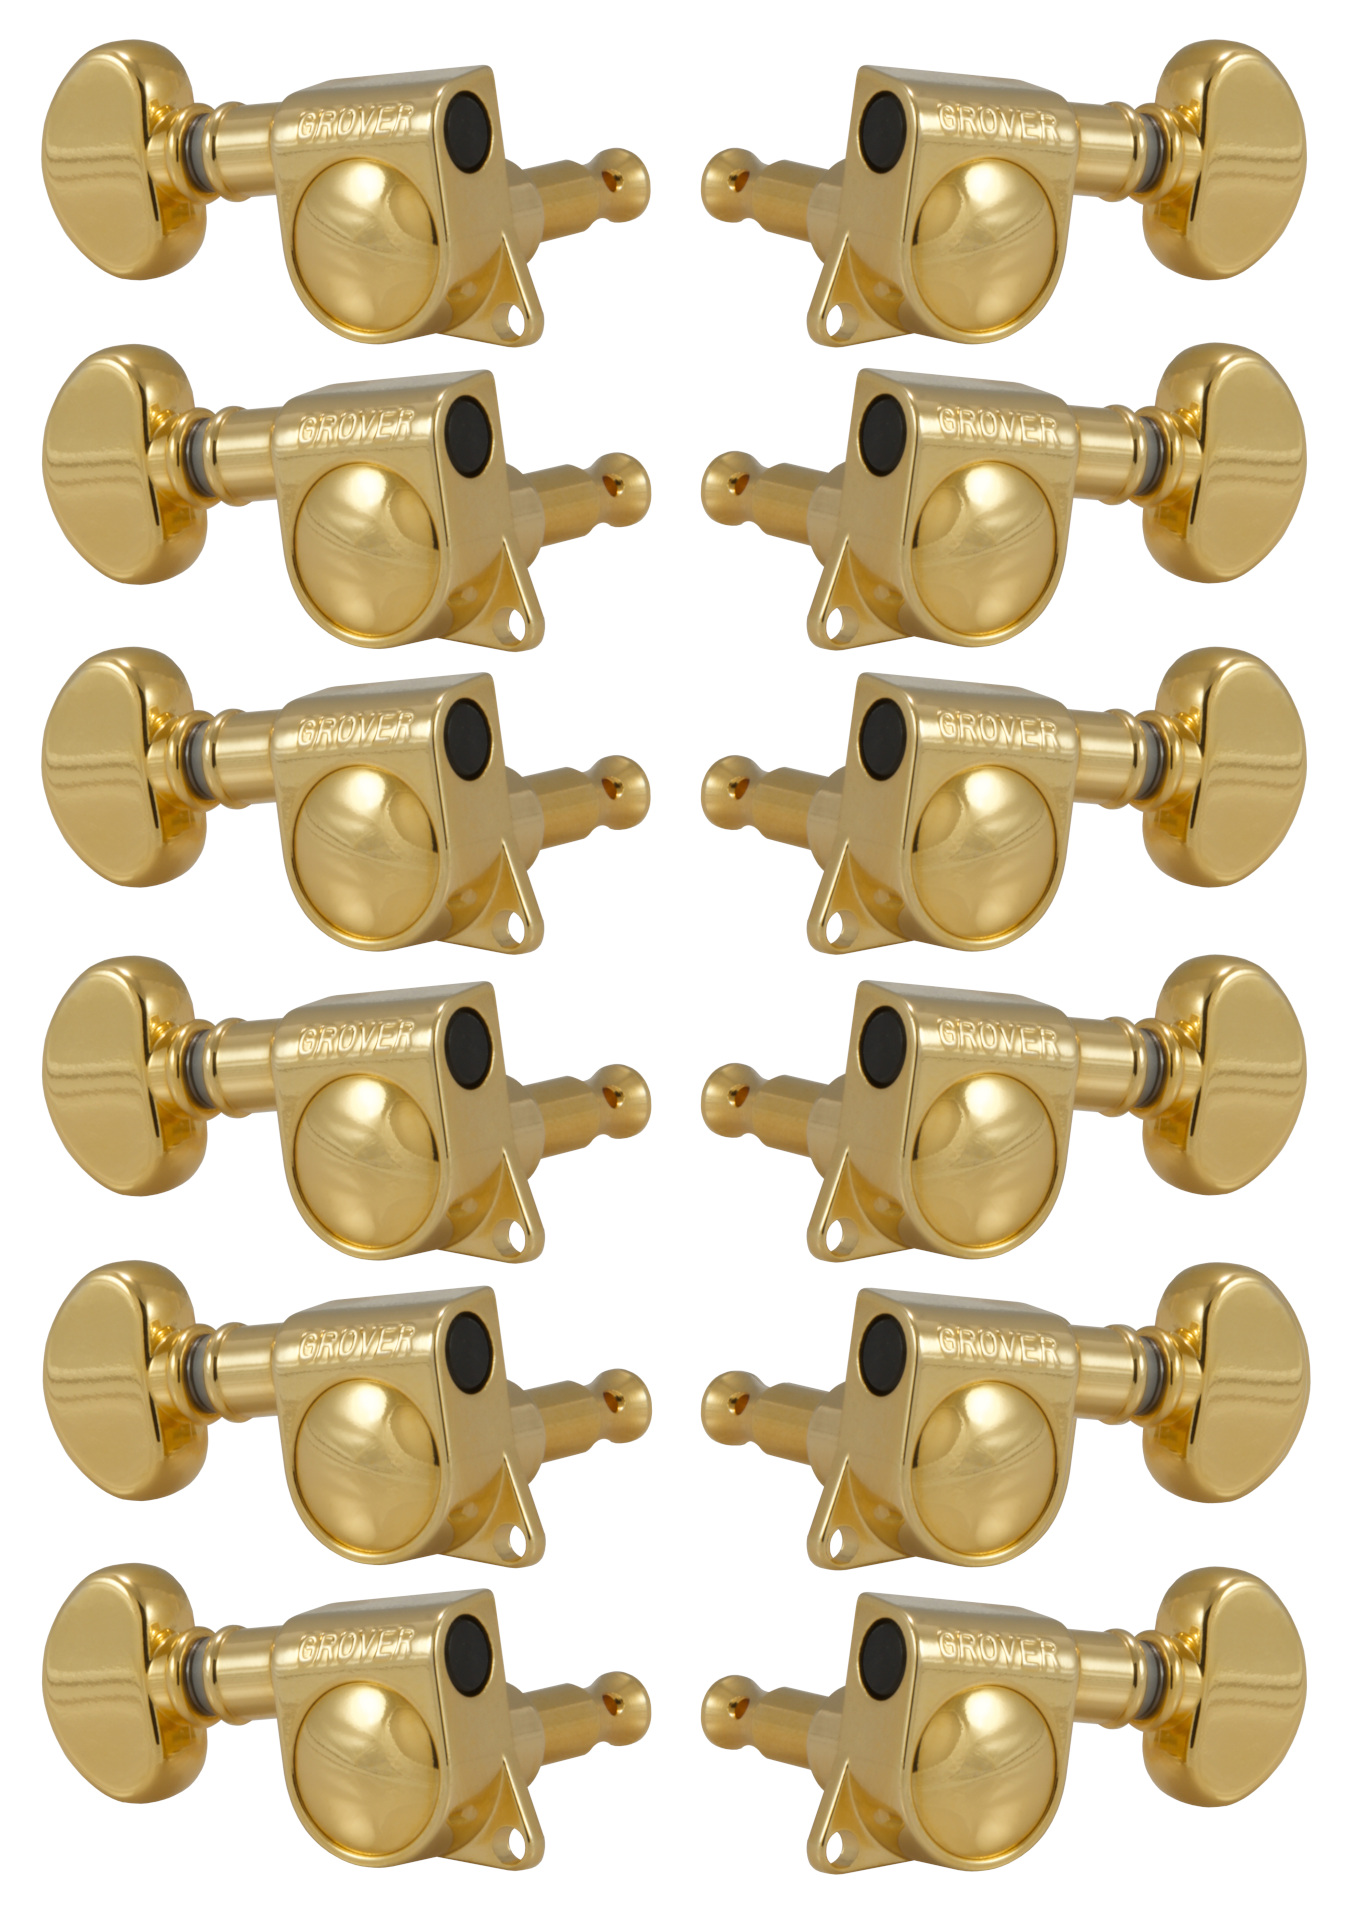 Grover 305G12 Mid-Size Rotomatics with Round Button - 12-String Guitar Machine Heads, 6 + 6 - Gold